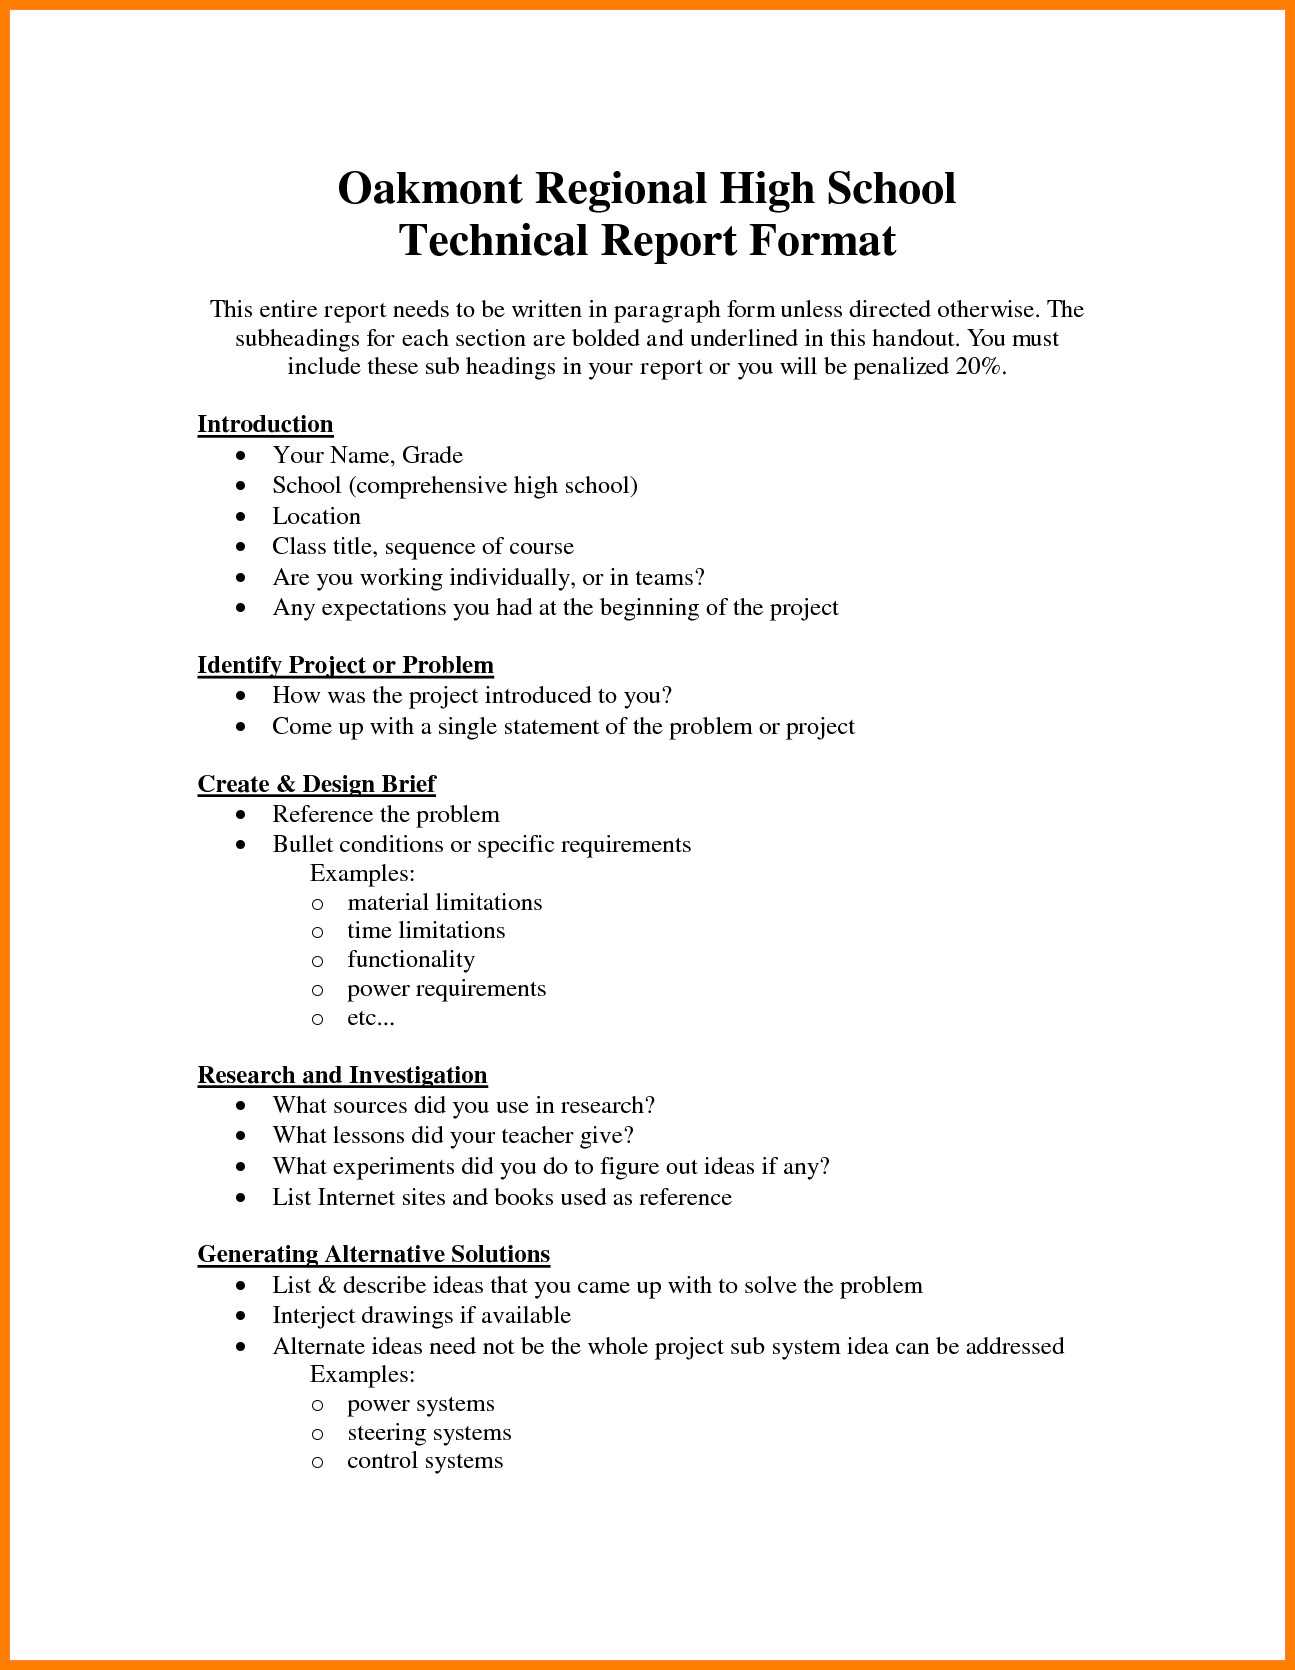 10+ Technical Report Writing Examples - Pdf | Examples Throughout Template For Technical Report